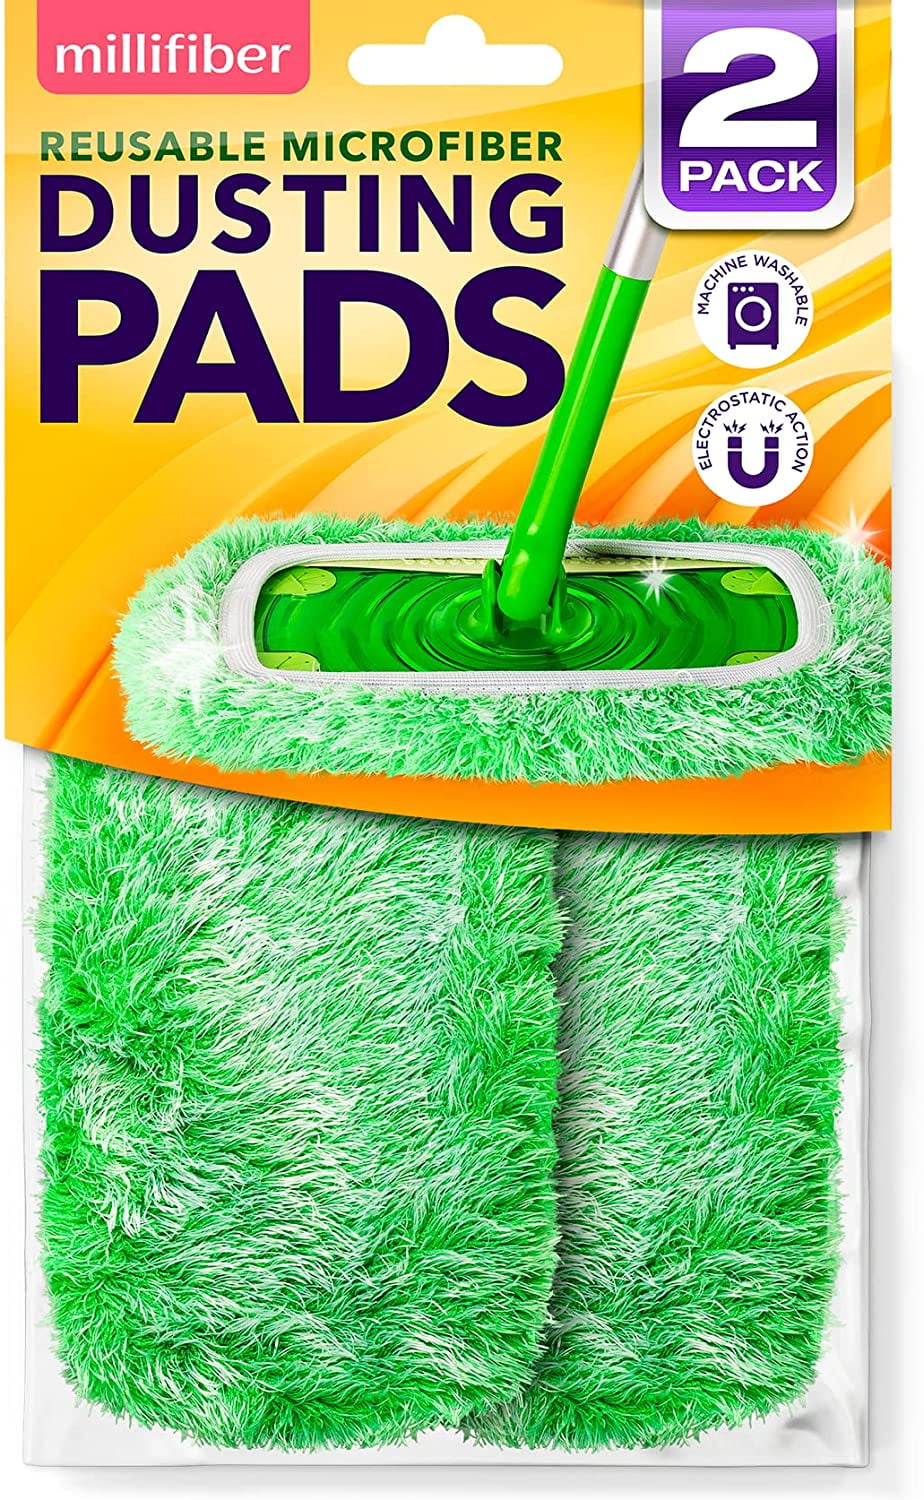 (Pack of 2) Reusable Mop Pads Refills Compatible with Swiffer Wet Jet -  Heavy Duty Microfiber Material & Washable (Green